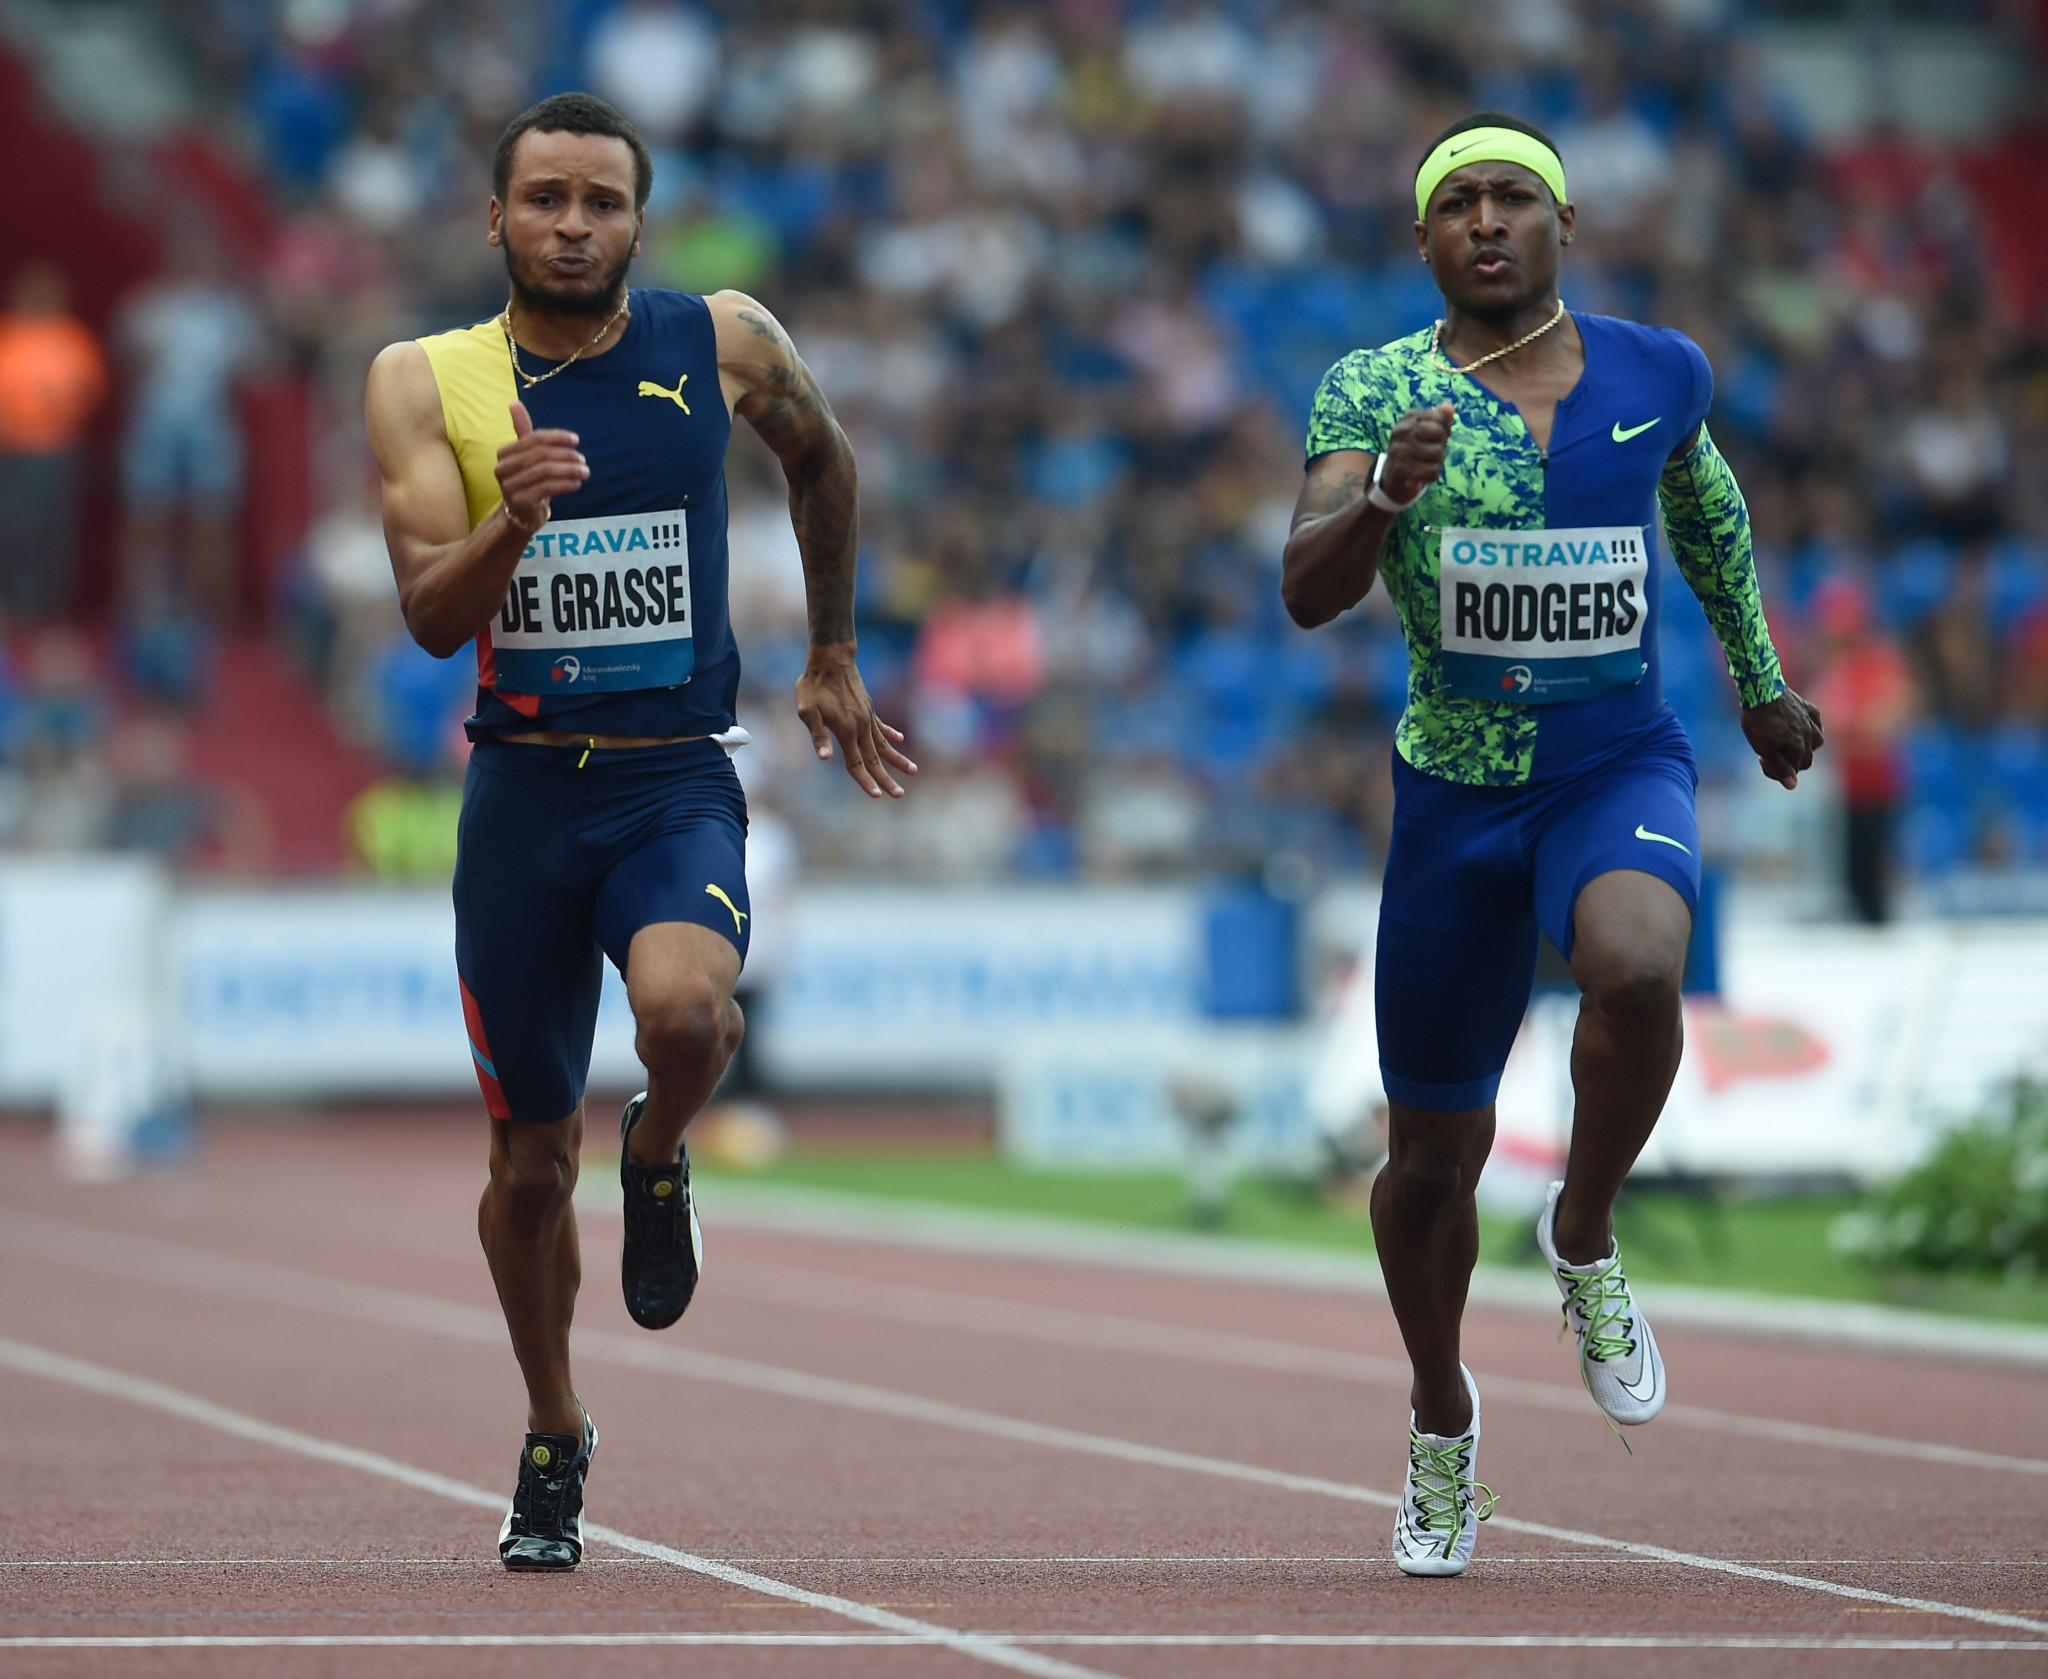 Andre De Grasse of Canada and Mike Rodgers of United States compete during the 100m at the 2019 Golden Spike Athletics meeting in Ostrava, Czech Republic © Getty Images